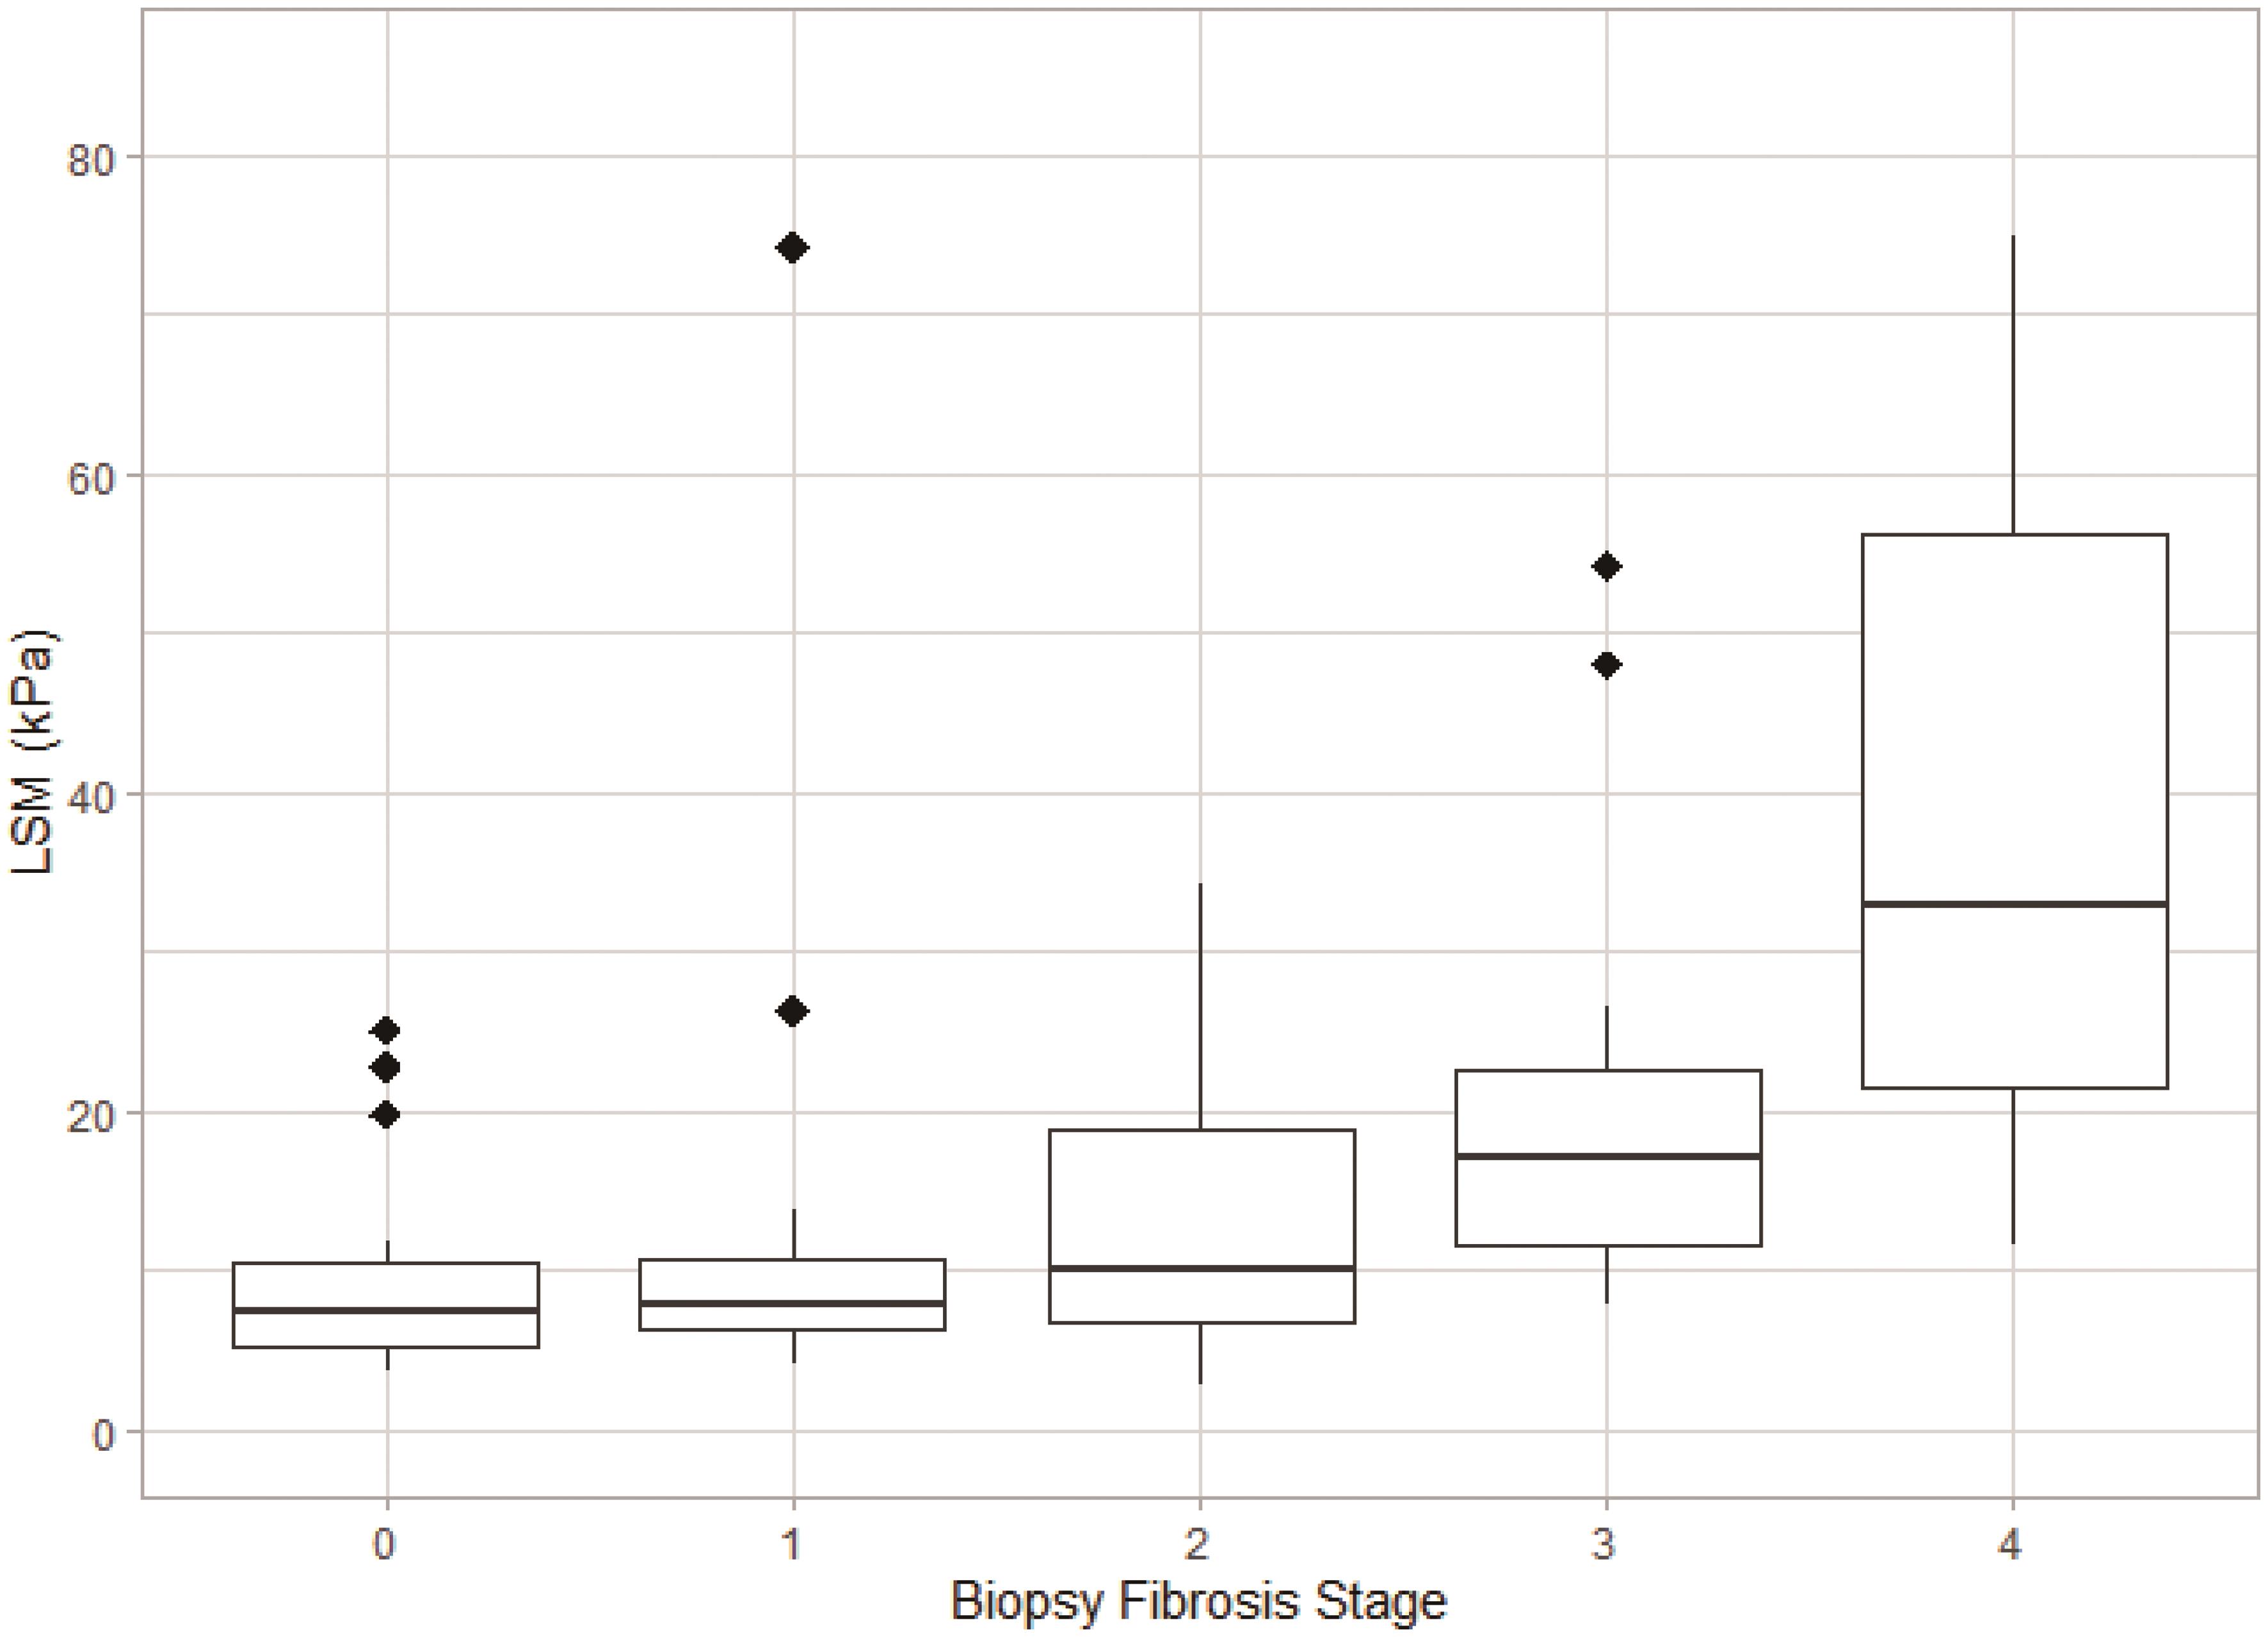 LSM distribution by each liver biopsy fibrosis stage represented by boxplot.